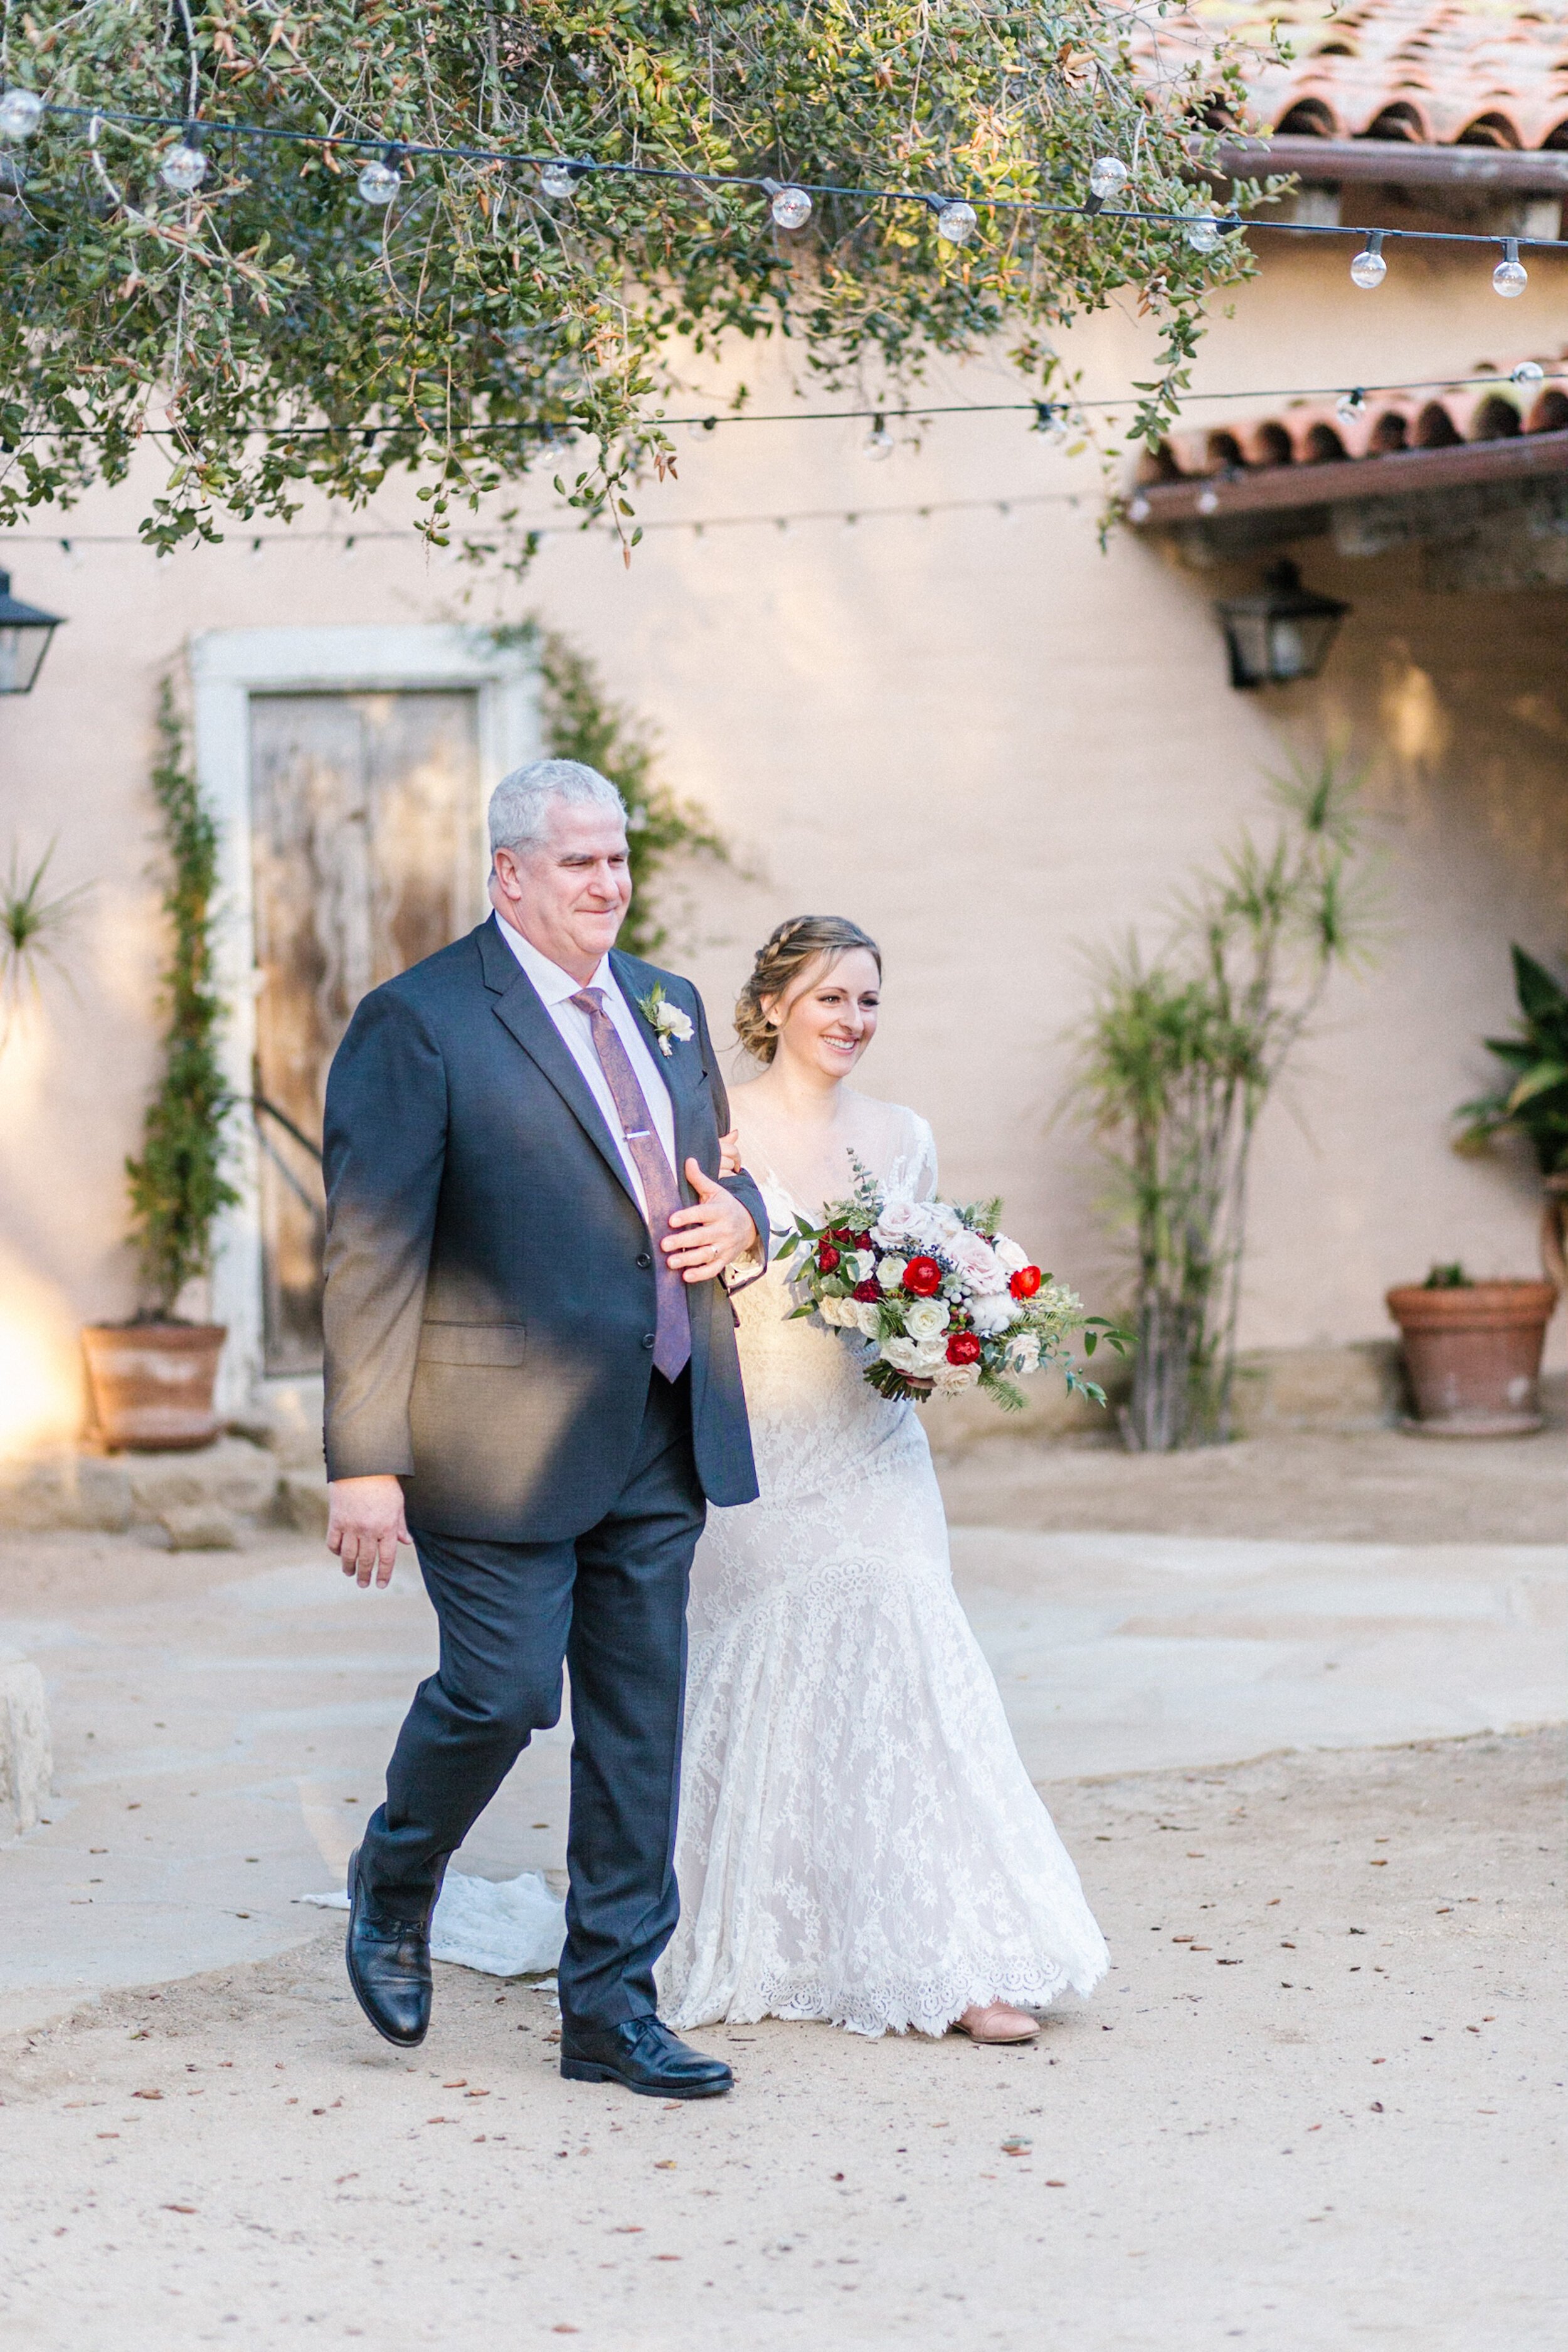 www.santabarbarawedding.com | Hannah Rose Gray | Santa Barbara Historical Museum | Alexis Ireland Florals | Carlyle Salon | Bride Walking Down the Aisle with Her Father